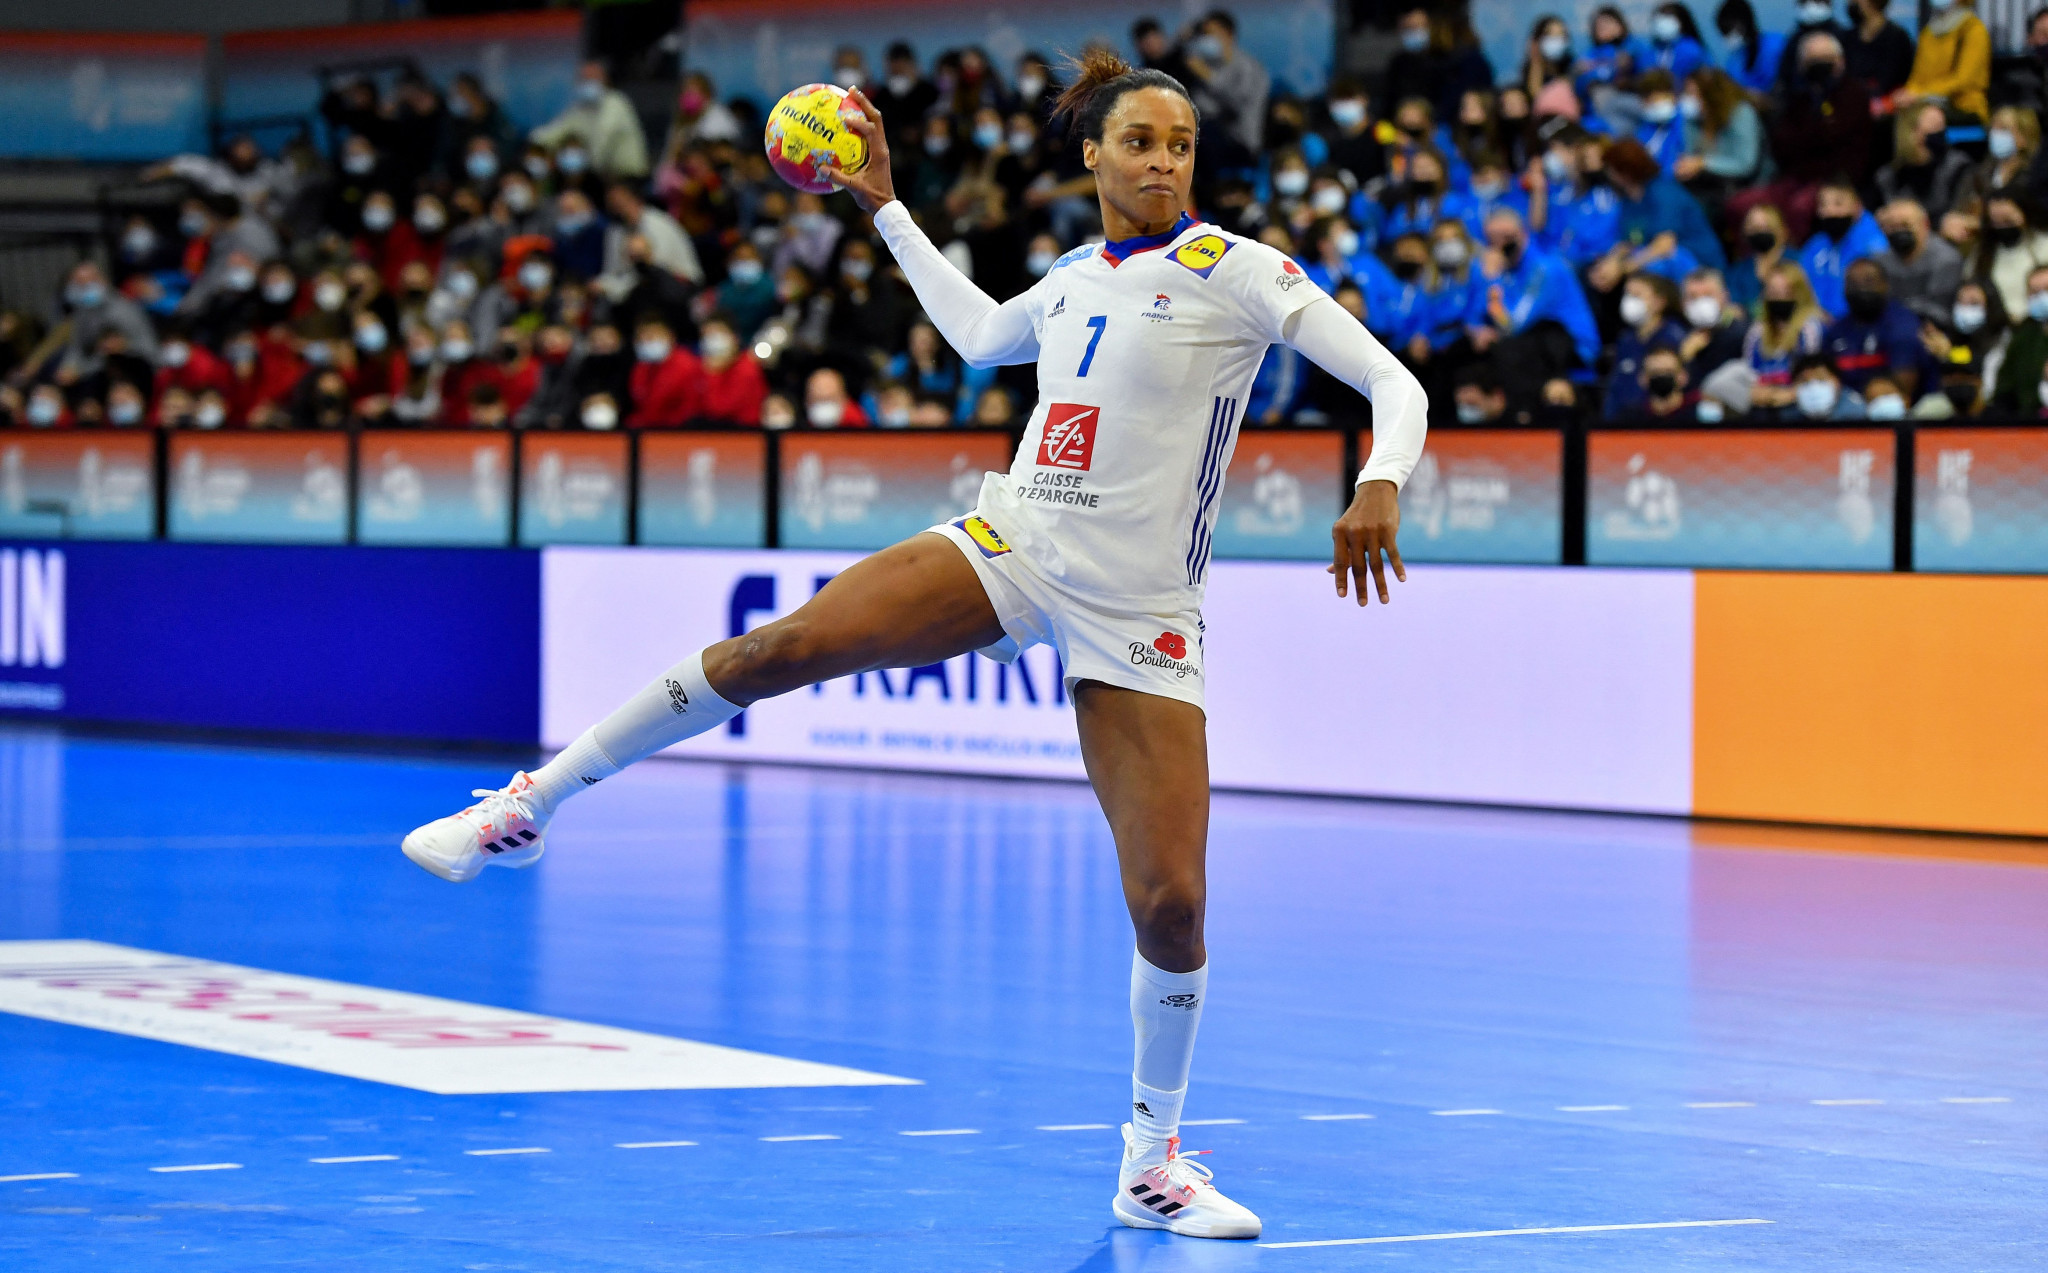 Olympic champion Pineau "frustrated" that Paris 2024 handball is not in city